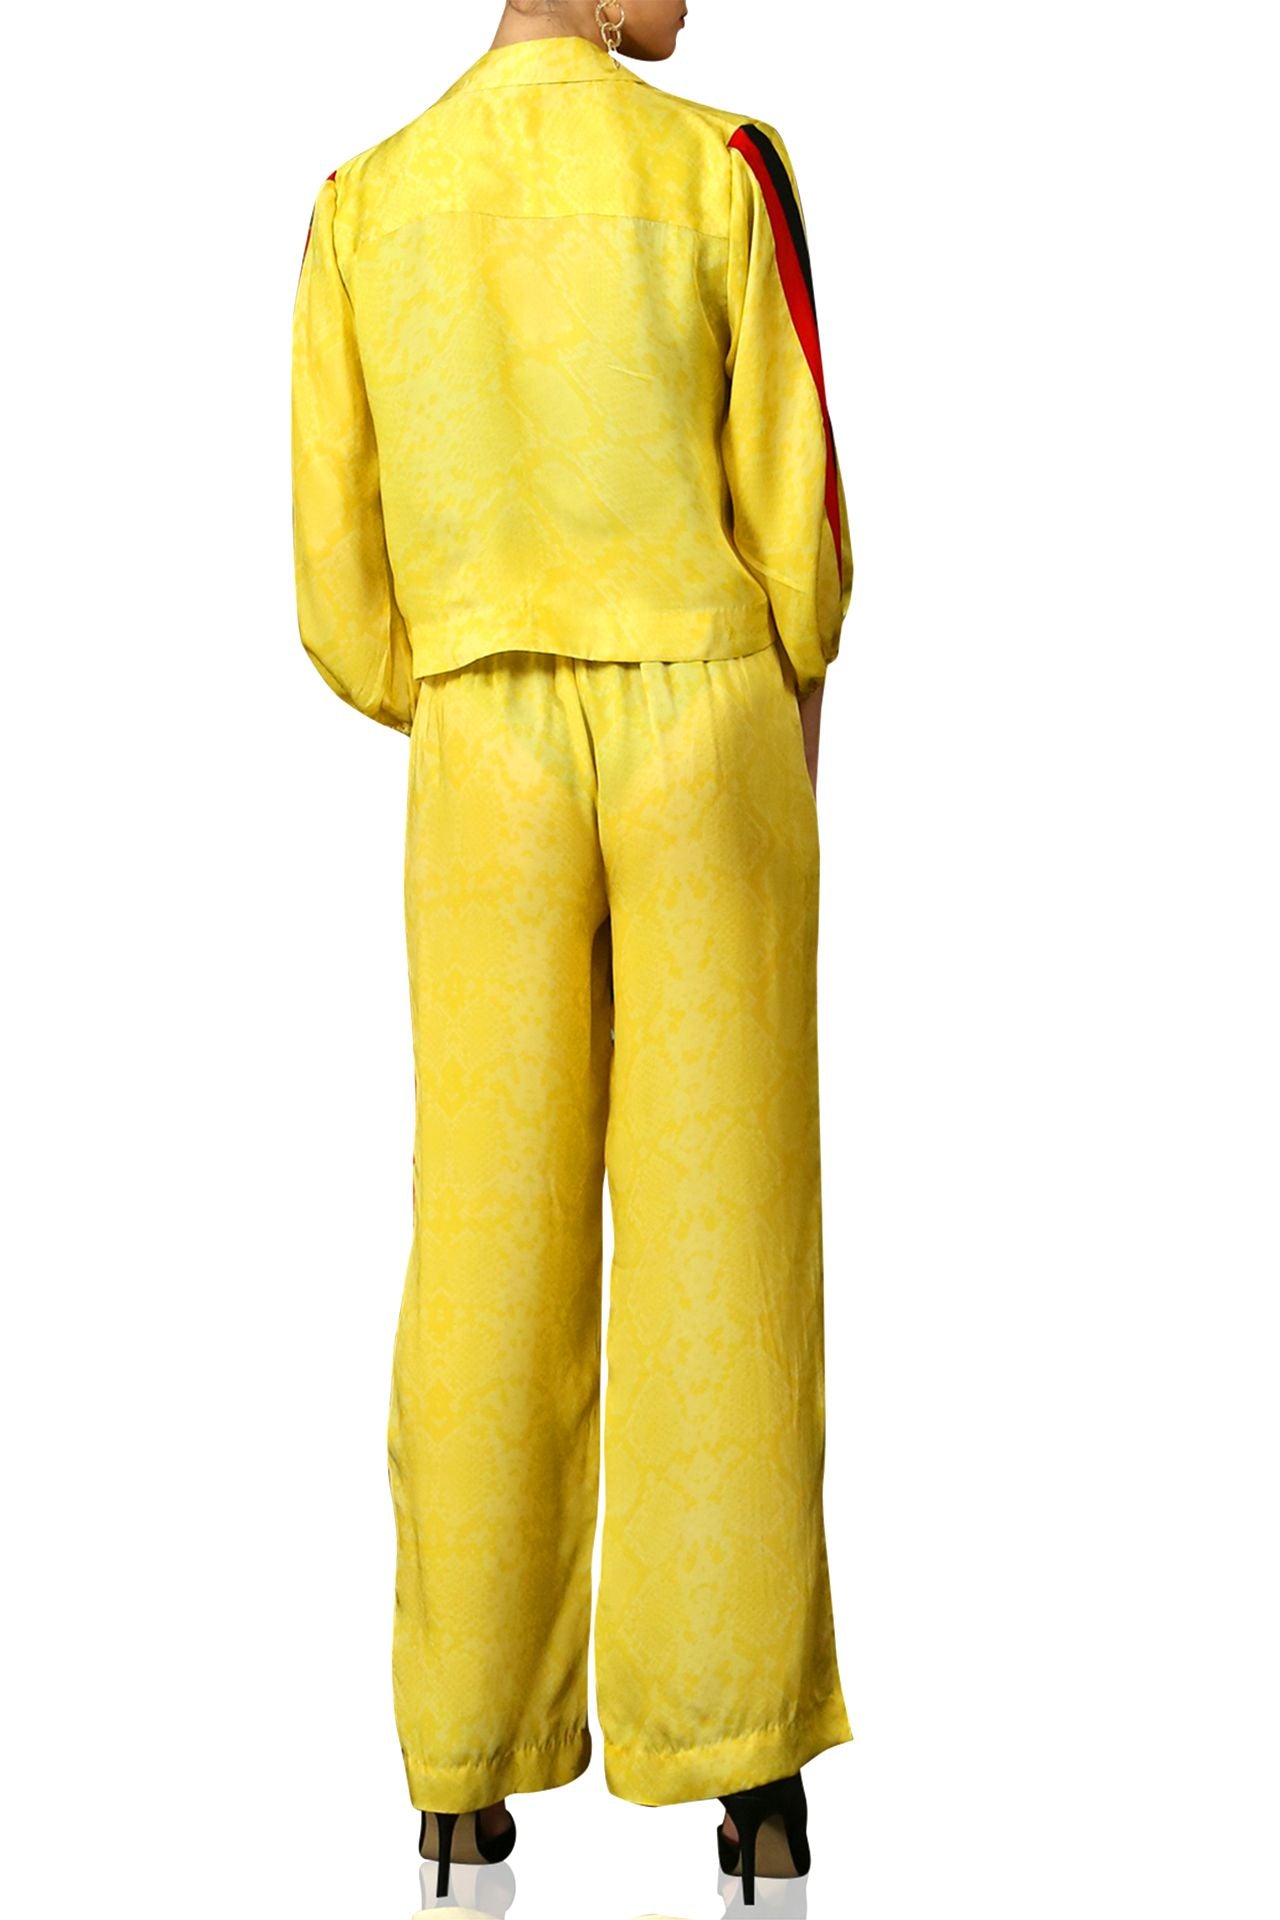 Kyle Matching Set in Yellow Track Suit Cropped Jacket with Pant